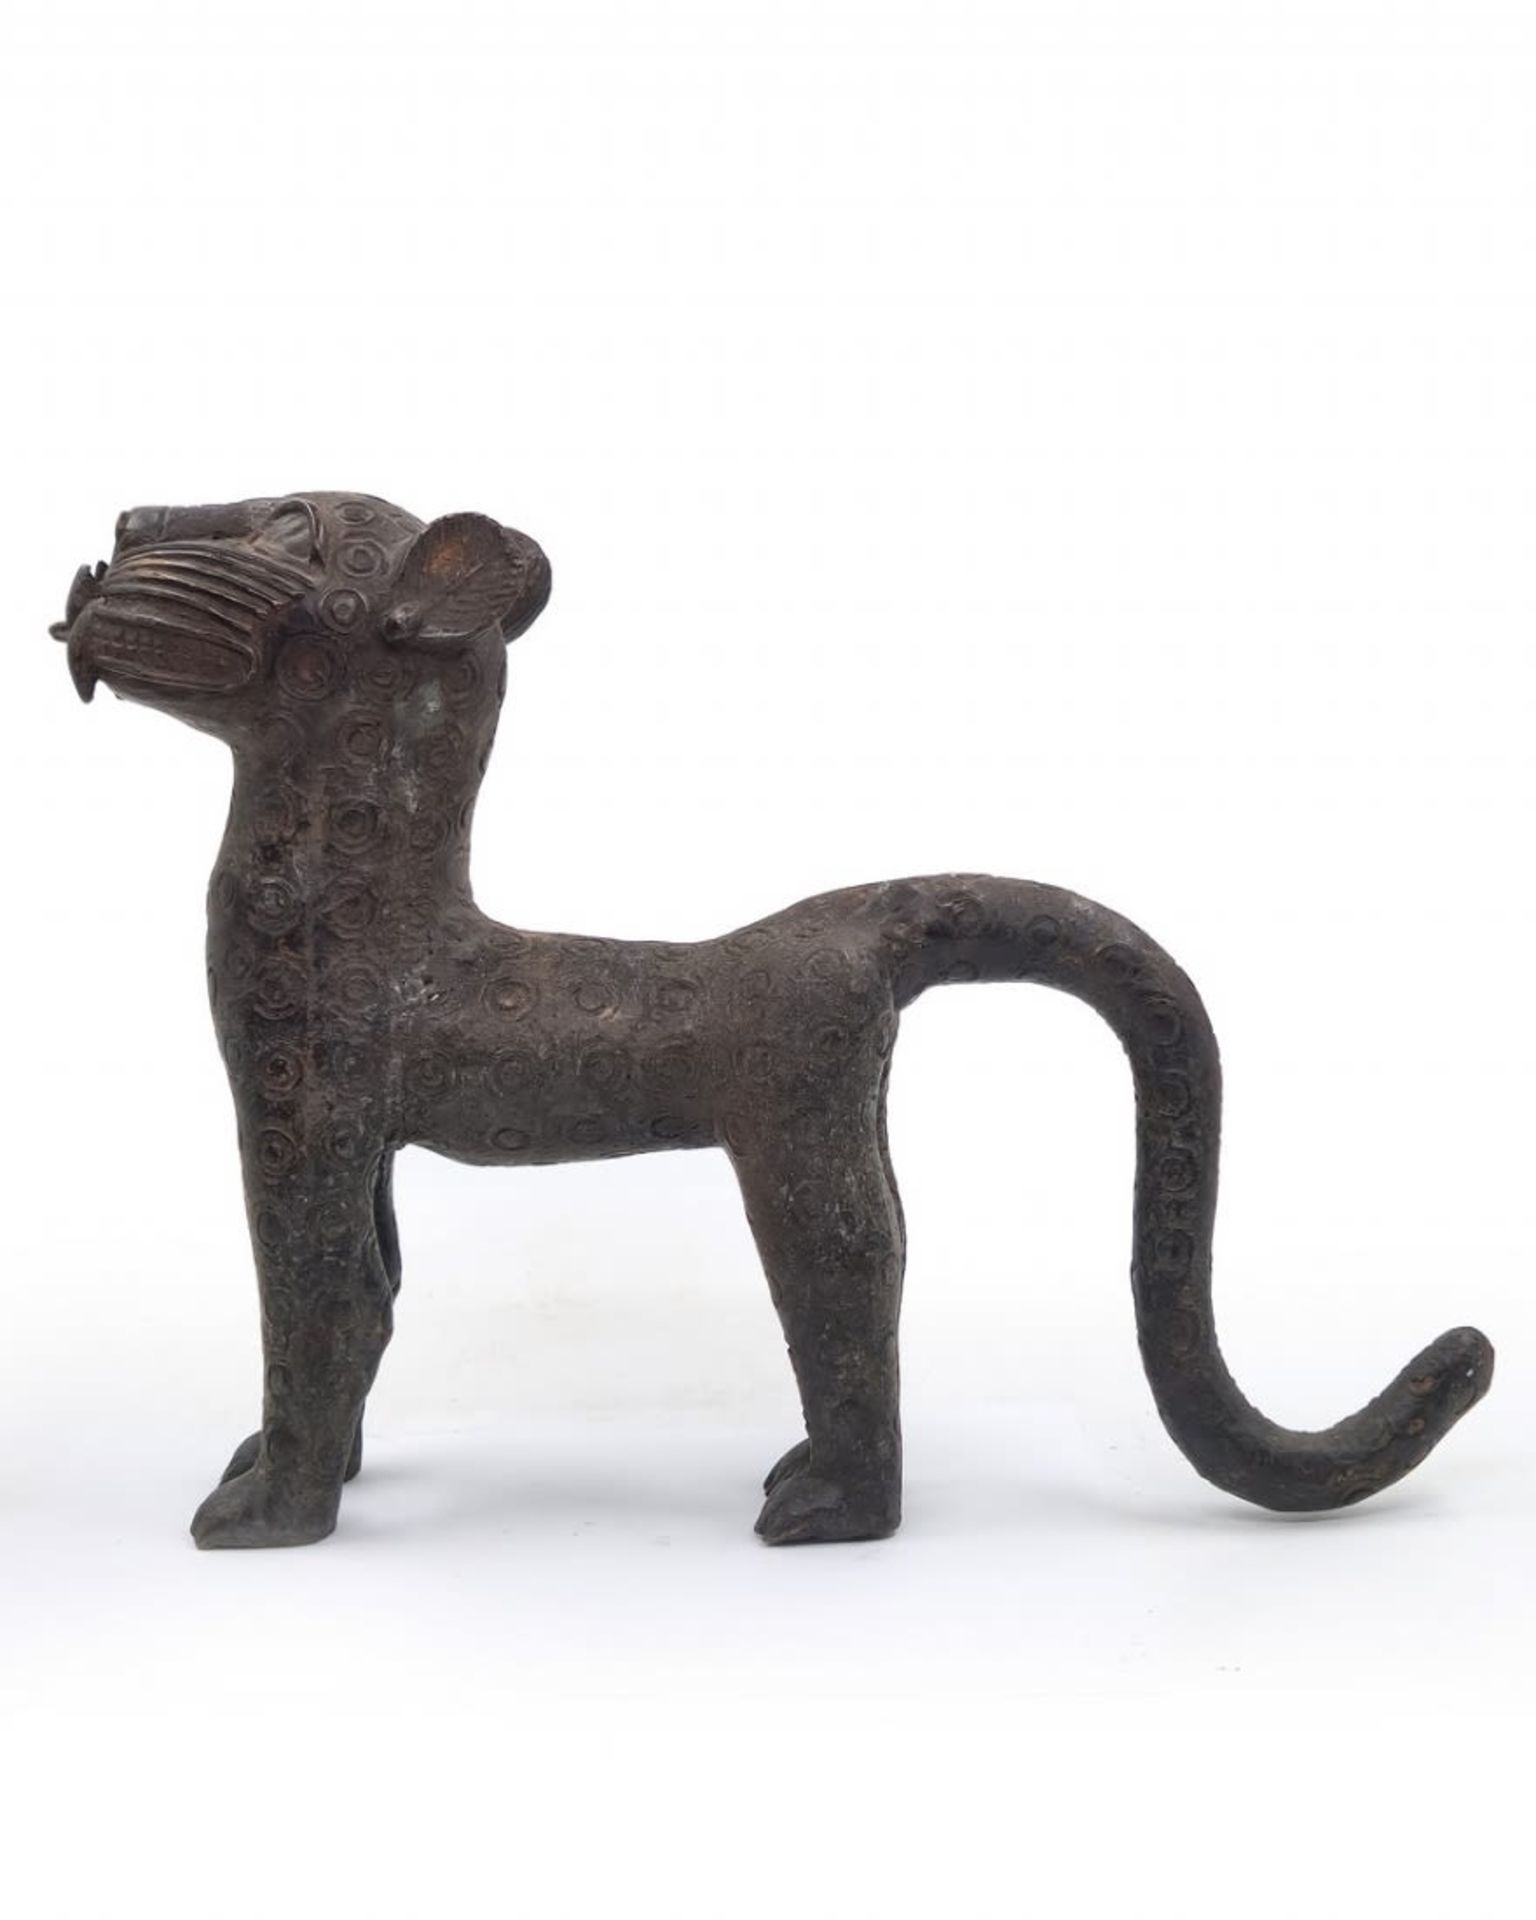 A pair of antique African statues, around hundred years old, in the form of panthers, made in ' - Image 6 of 8